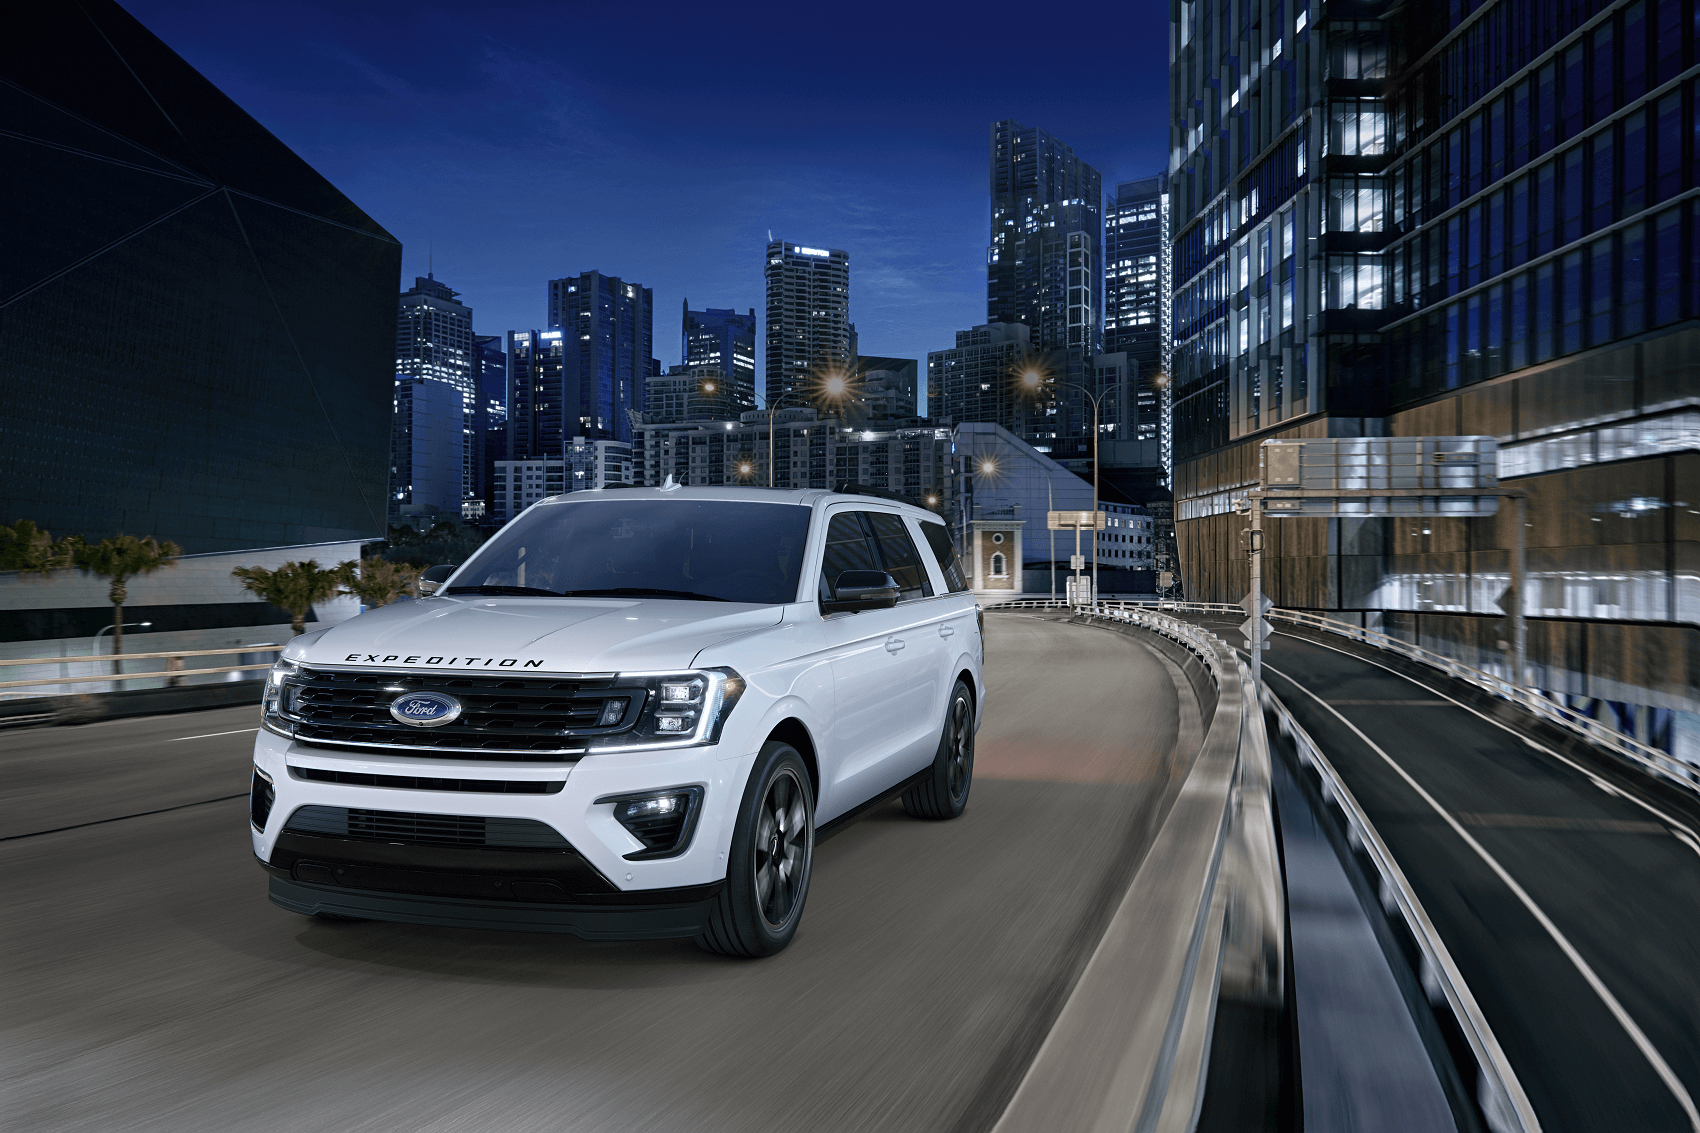 Ford Expedition cruising through city at night